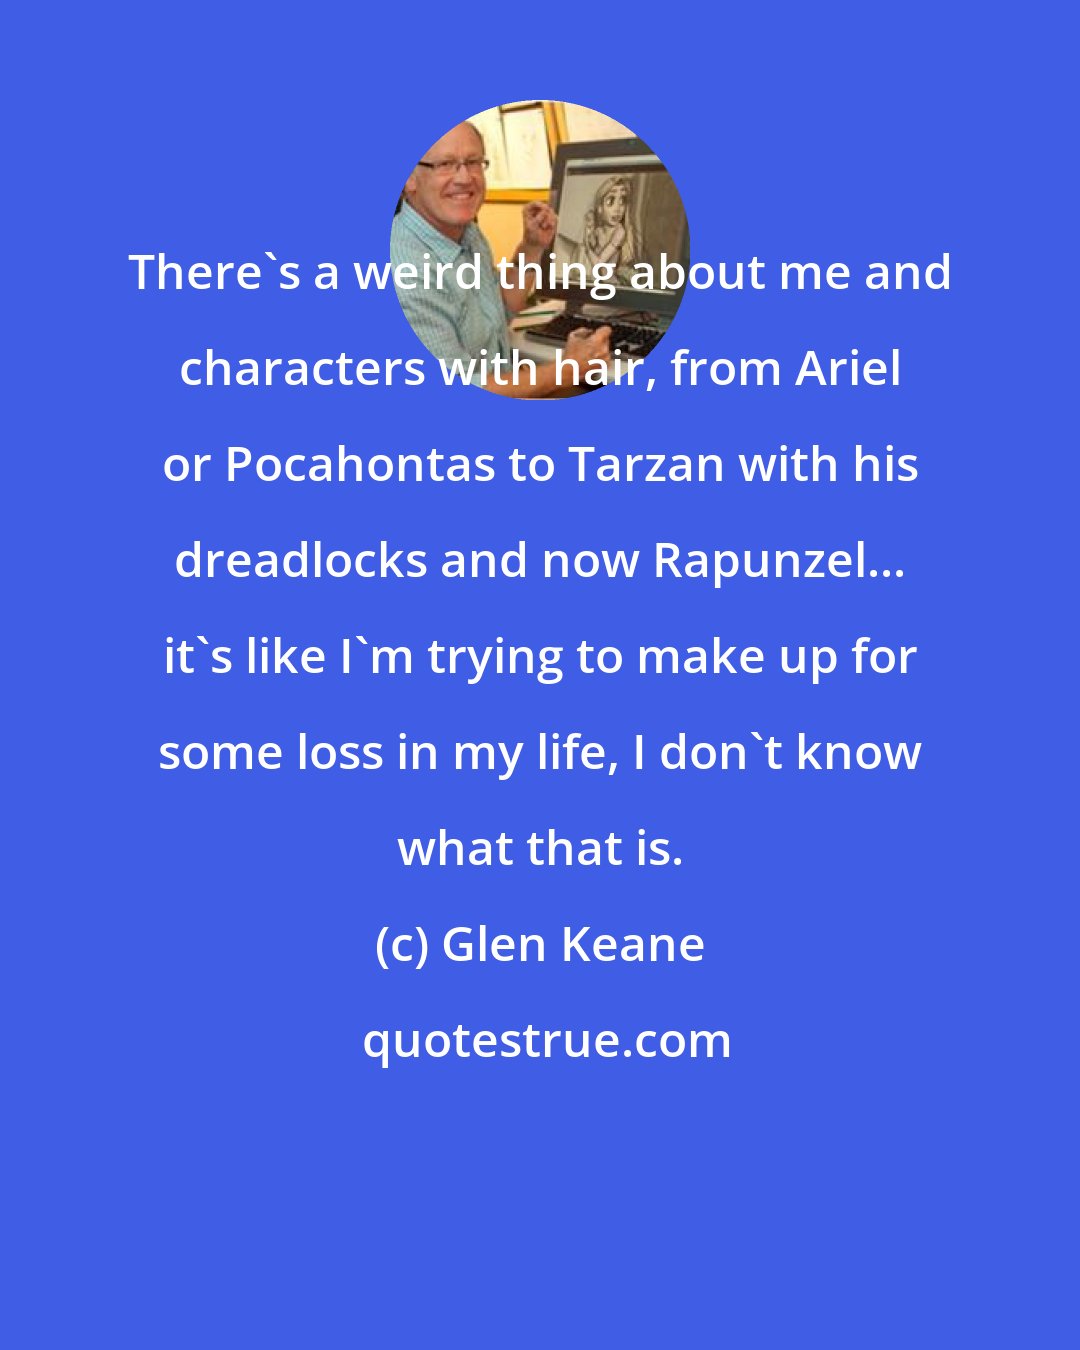 Glen Keane: There's a weird thing about me and characters with hair, from Ariel or Pocahontas to Tarzan with his dreadlocks and now Rapunzel... it's like I'm trying to make up for some loss in my life, I don't know what that is.